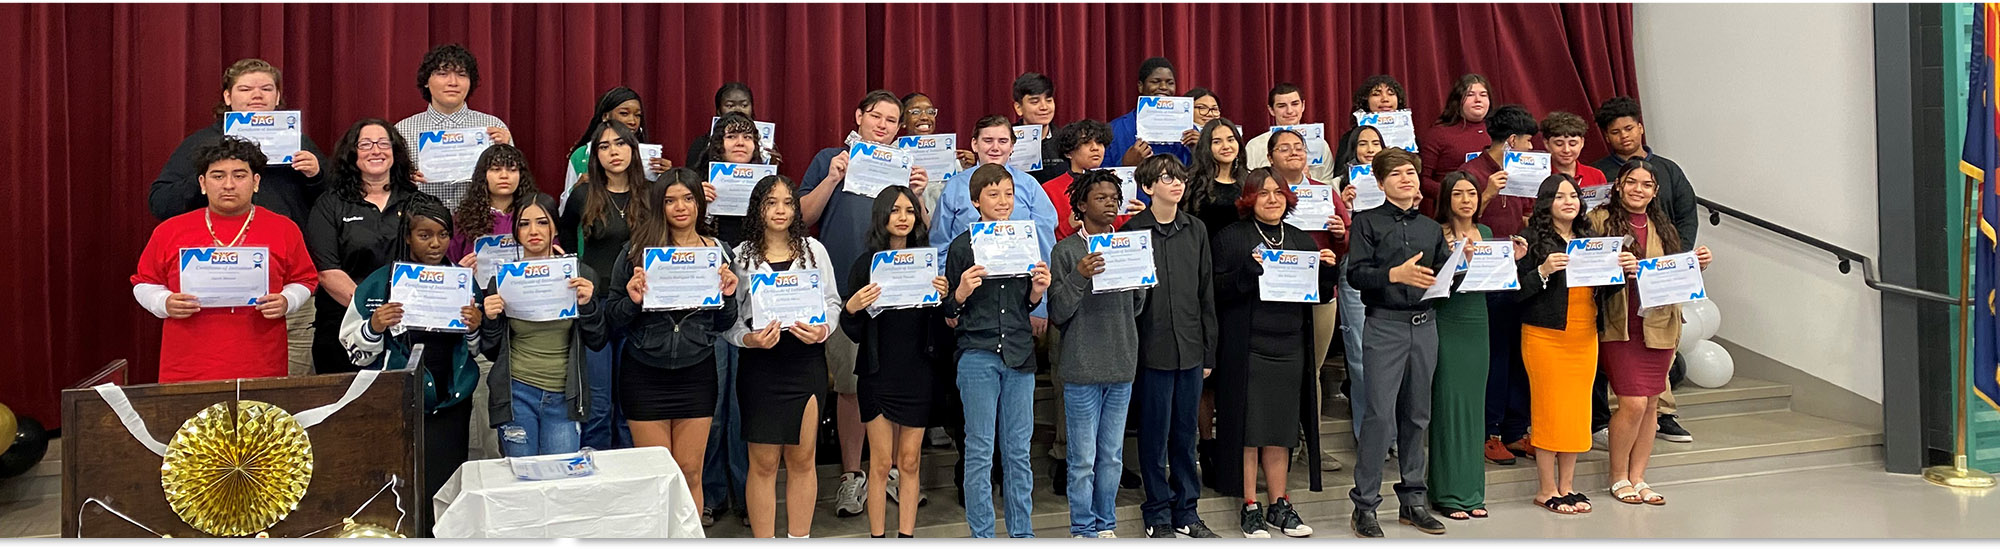 8th graders celebrate JAG Initiation an Installation Ceremony